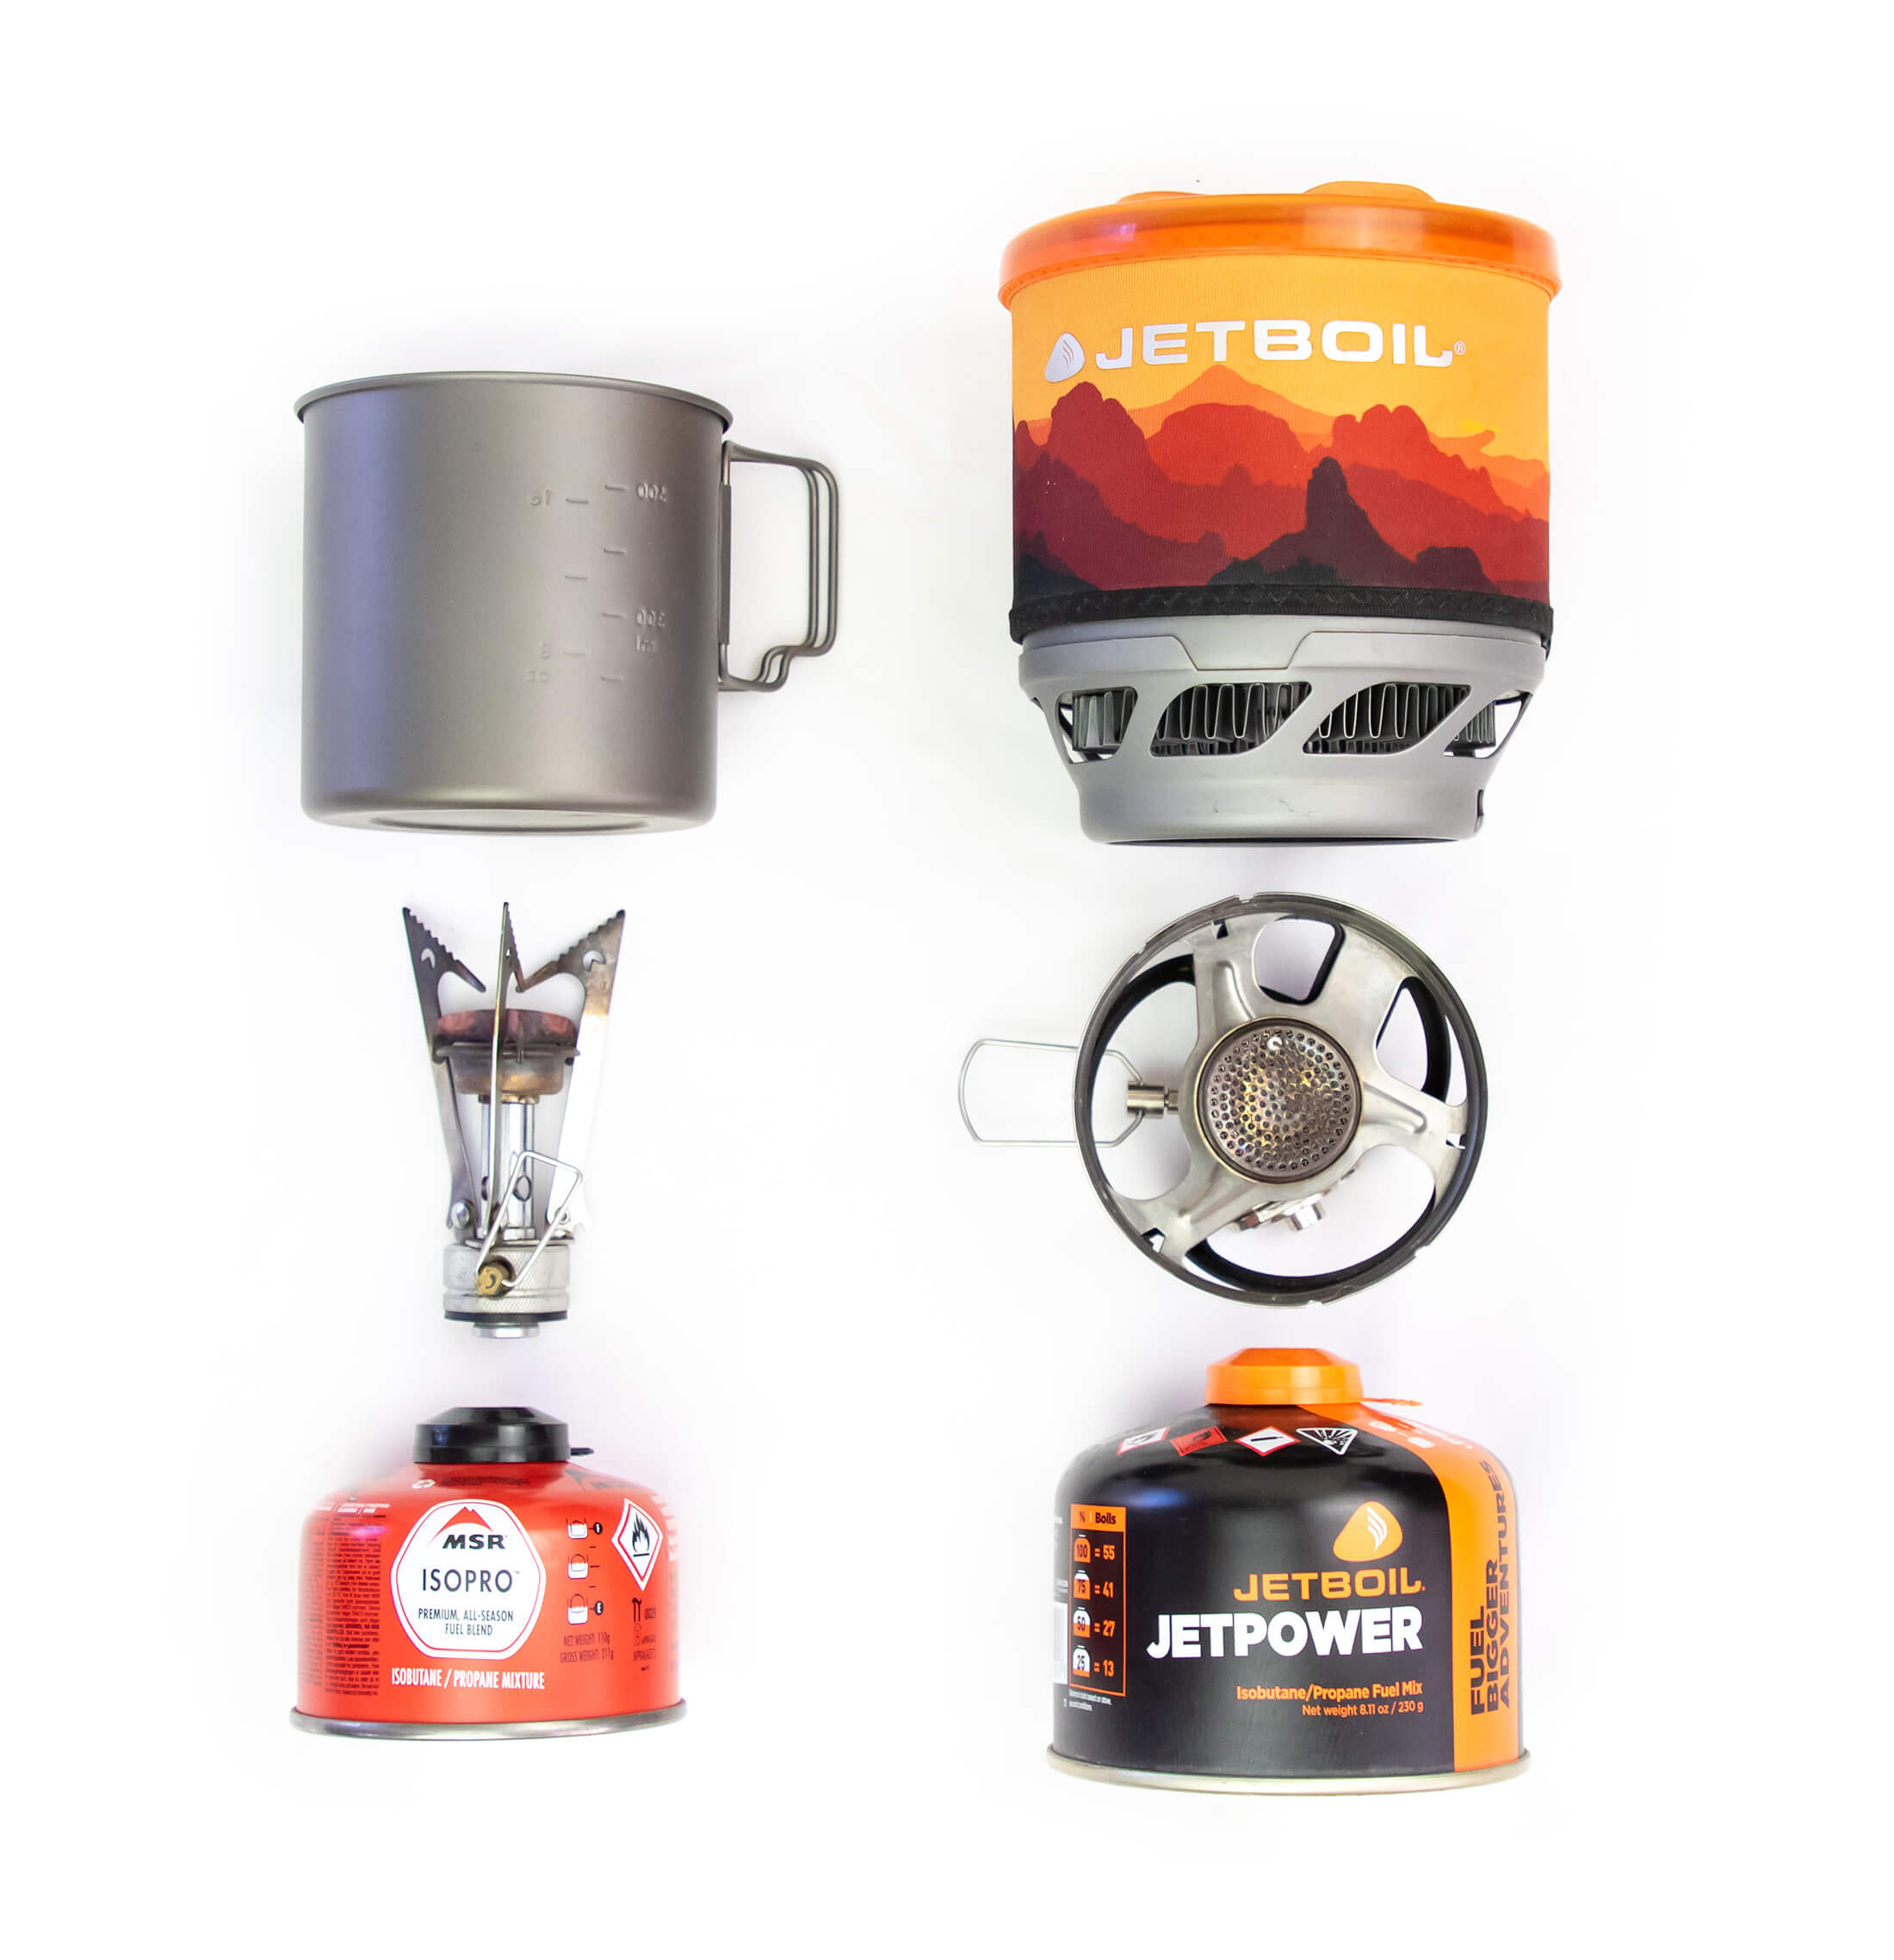 compact canister stove alongside integrated stove system